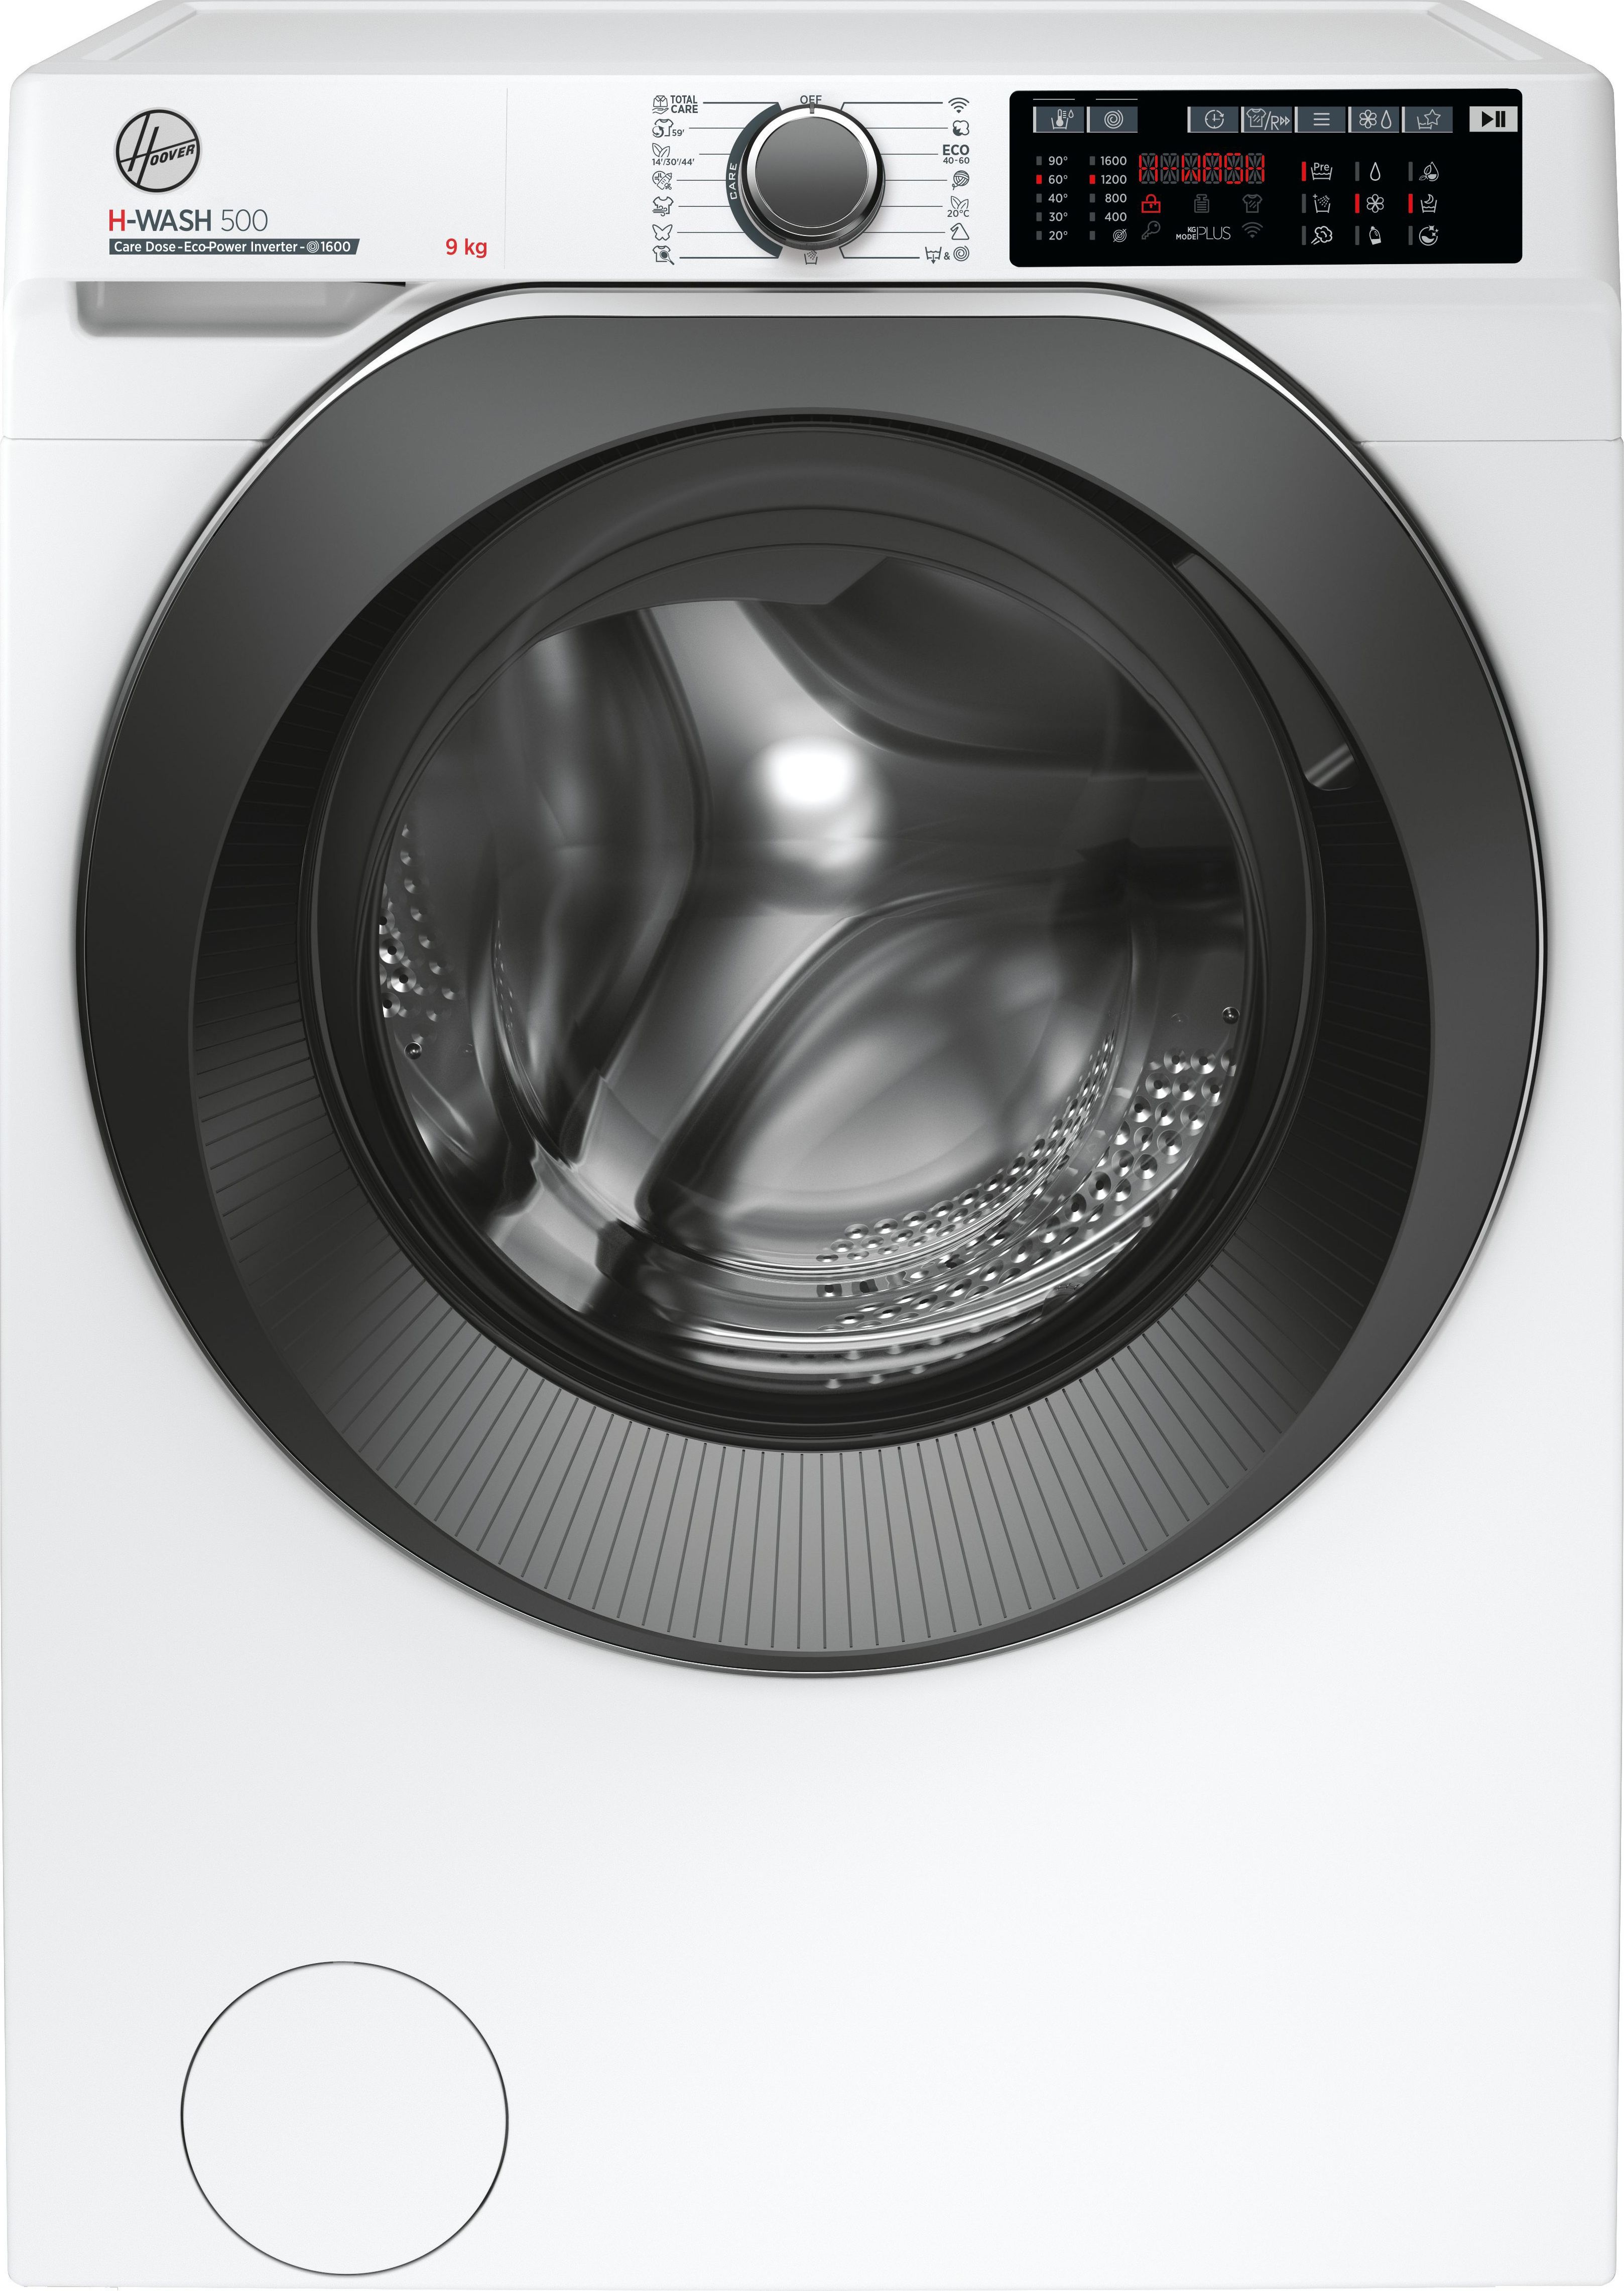 Hoover H-WASH 500 HWD69AMBC180 9kg Washing Machine with 1600 rpm - White - A Rated, White